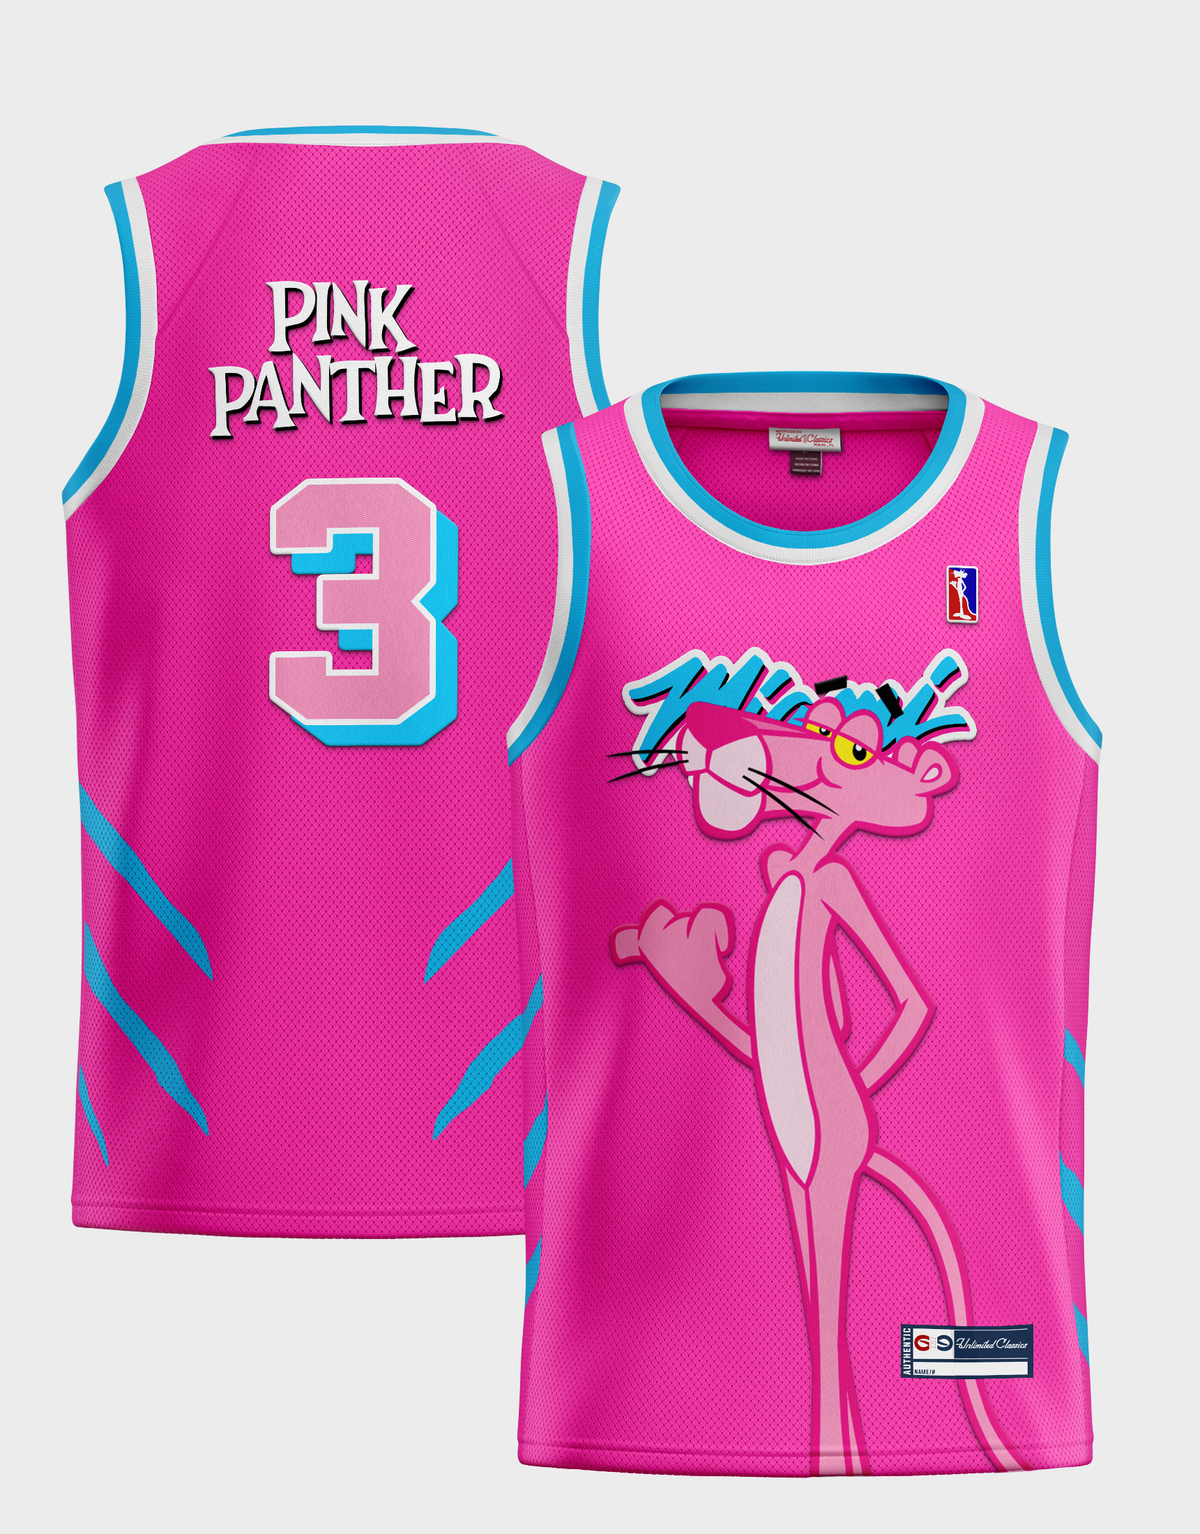 Youth Miami X Pink Panther #3 Basketball Jersey